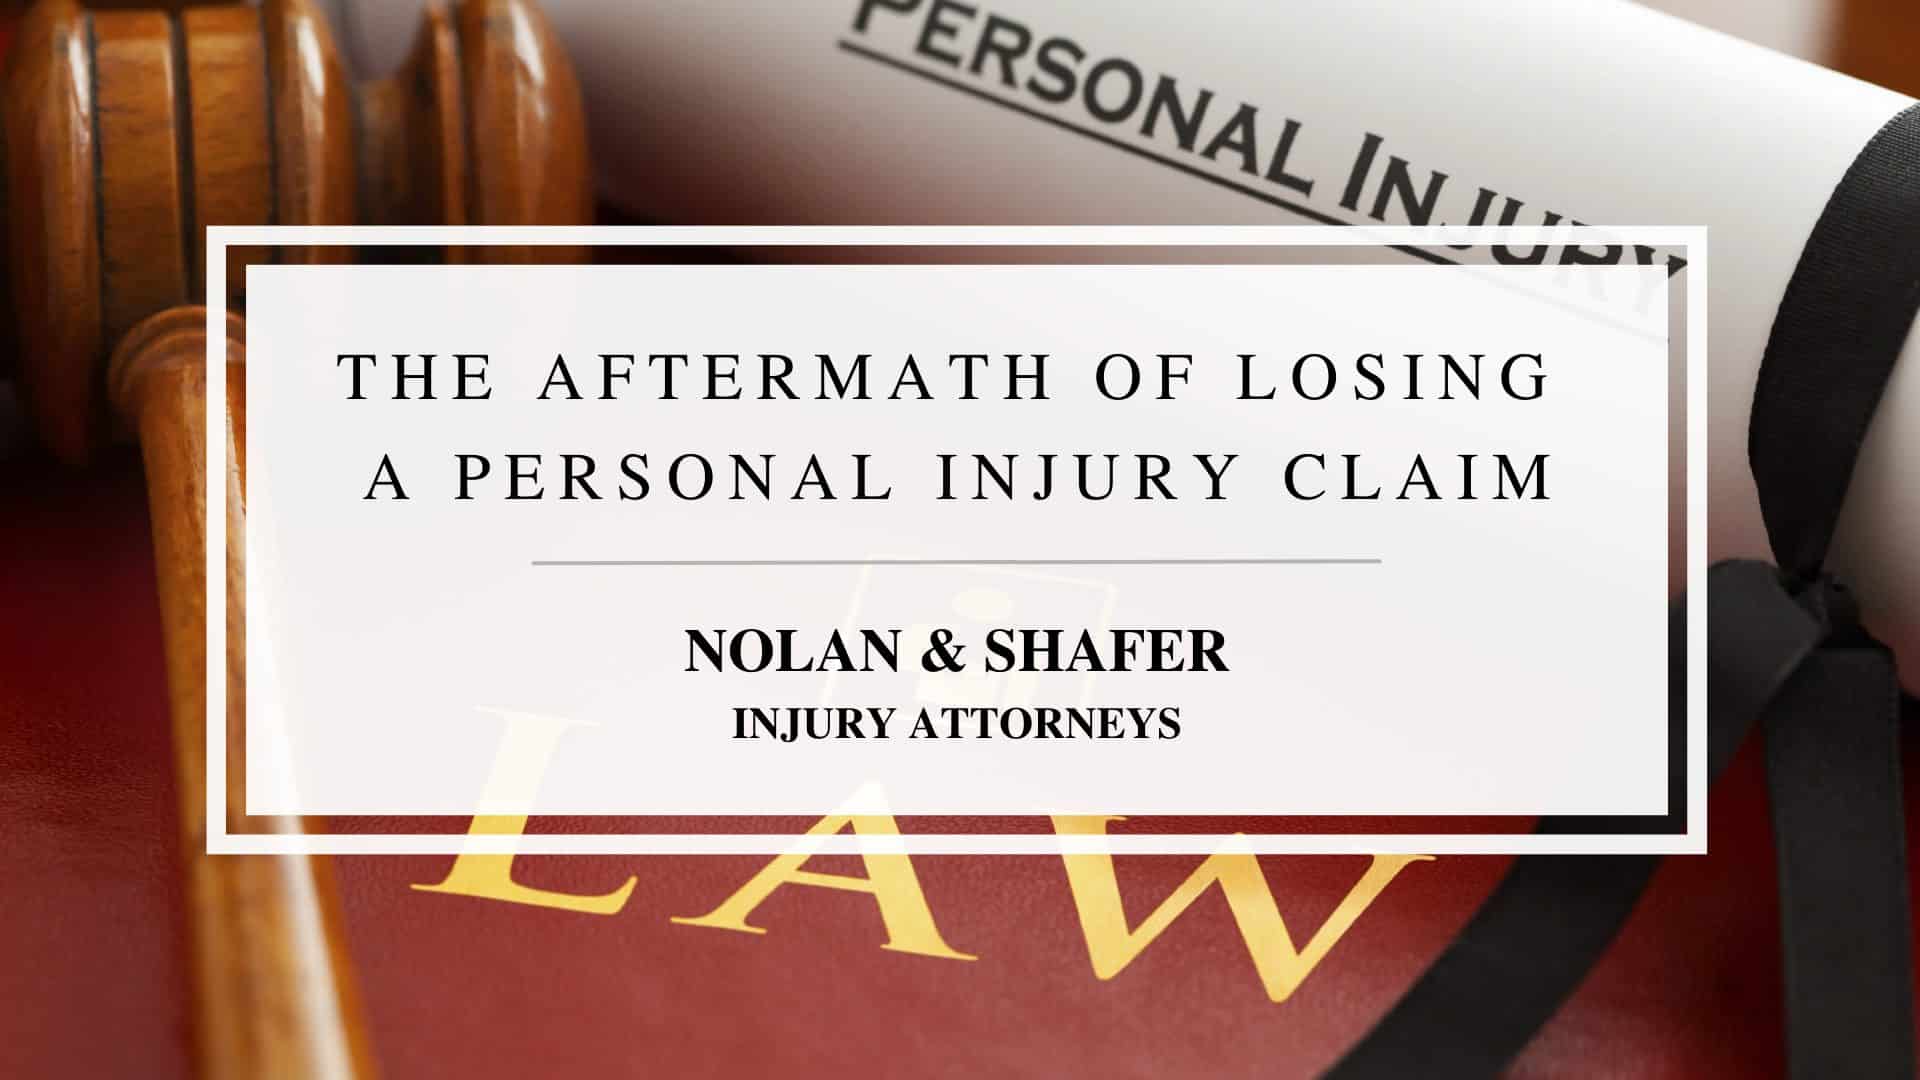 Featured image of losing a personal injury claim